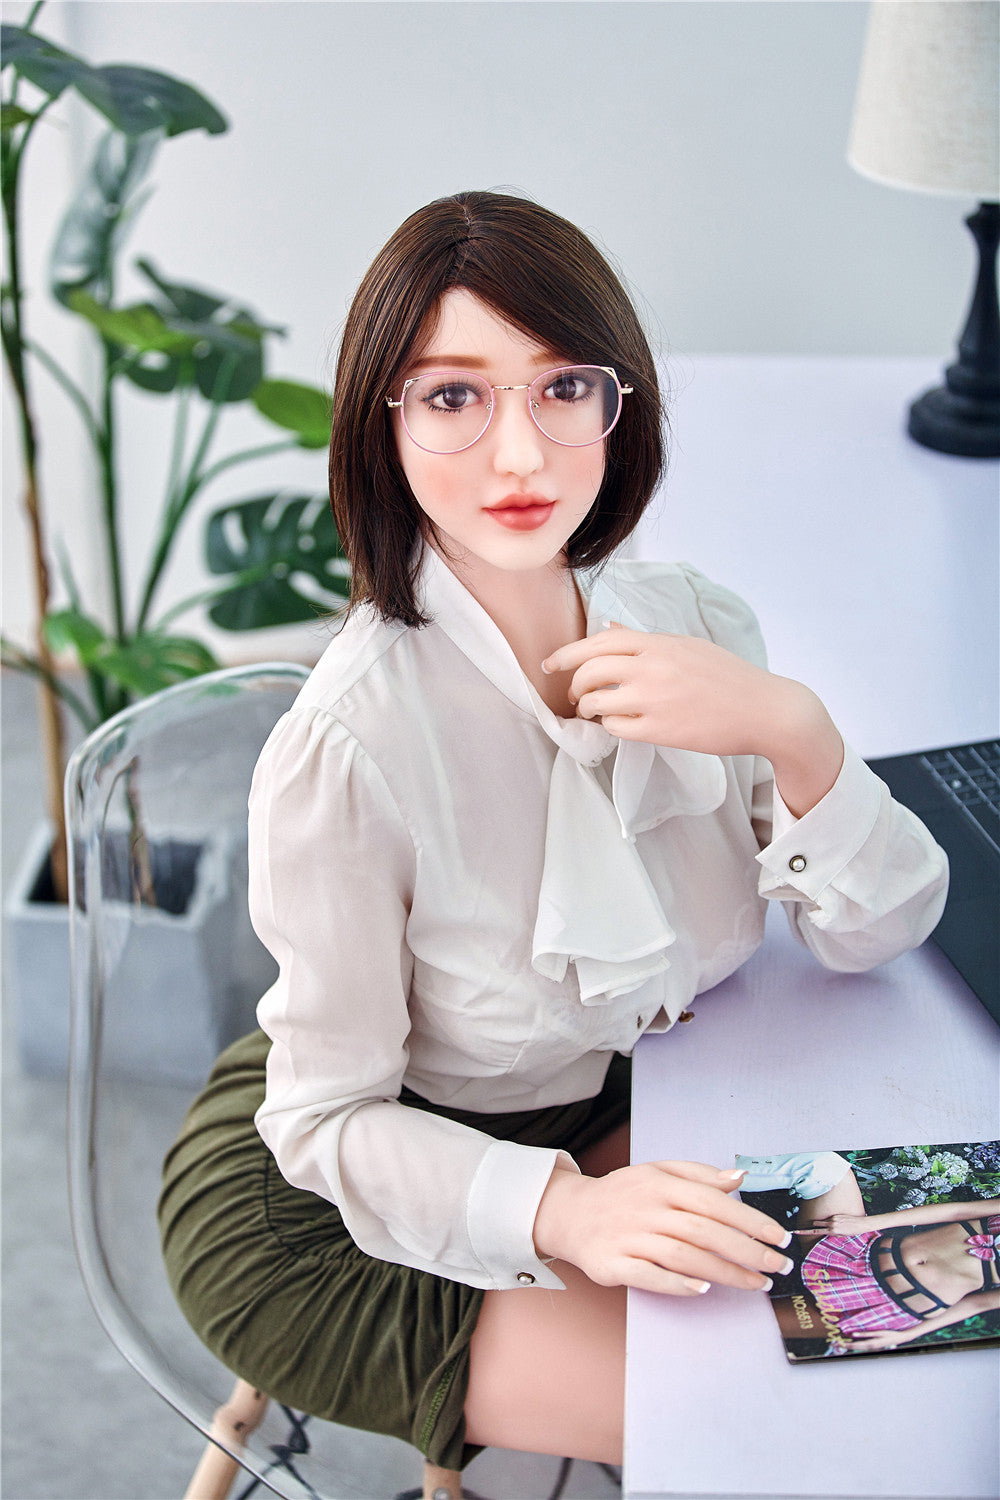 Irontech Doll 159 cm E TPE - Mika | Buy Sex Dolls at DOLLS ACTUALLY